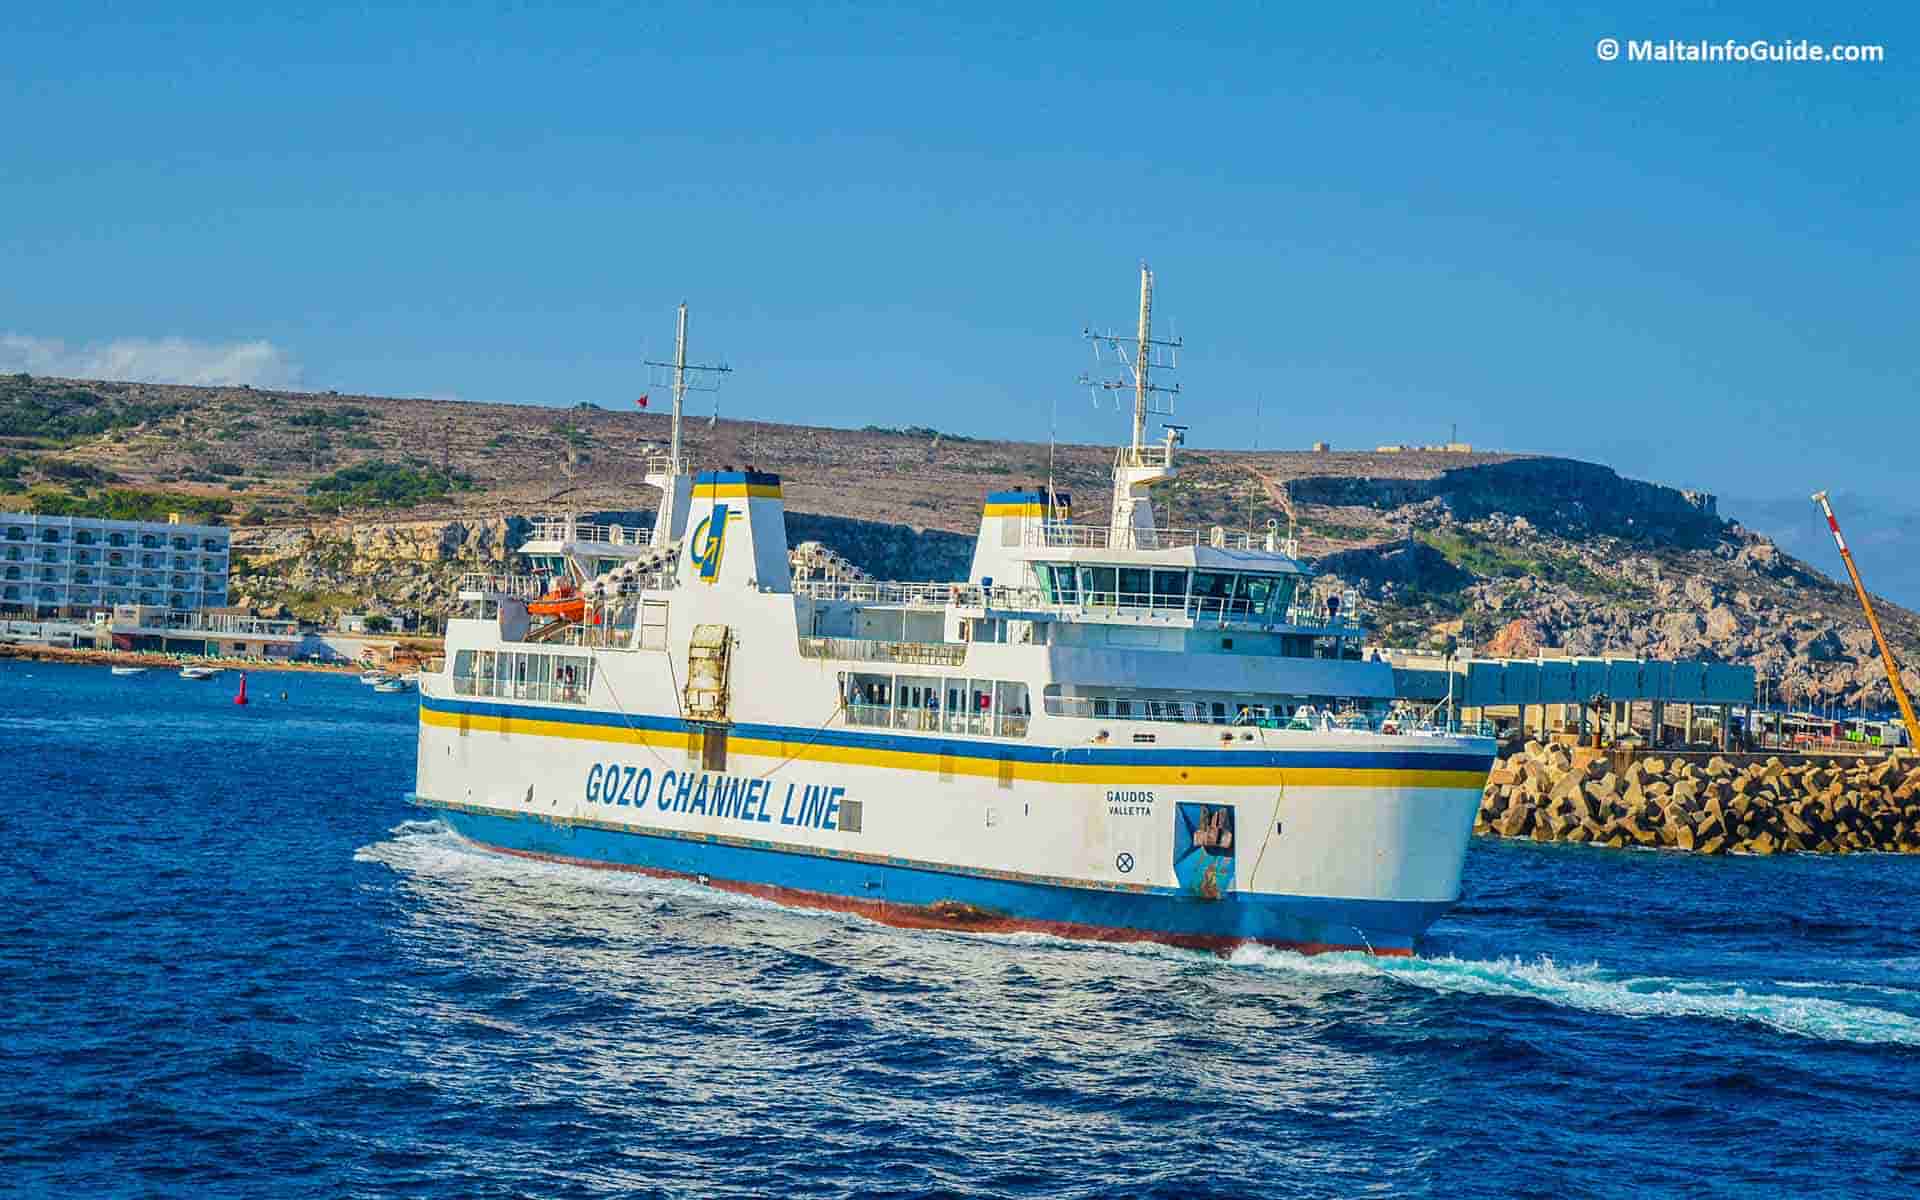 A Gozo channel ferry embarking at Cirkewwa terminal.